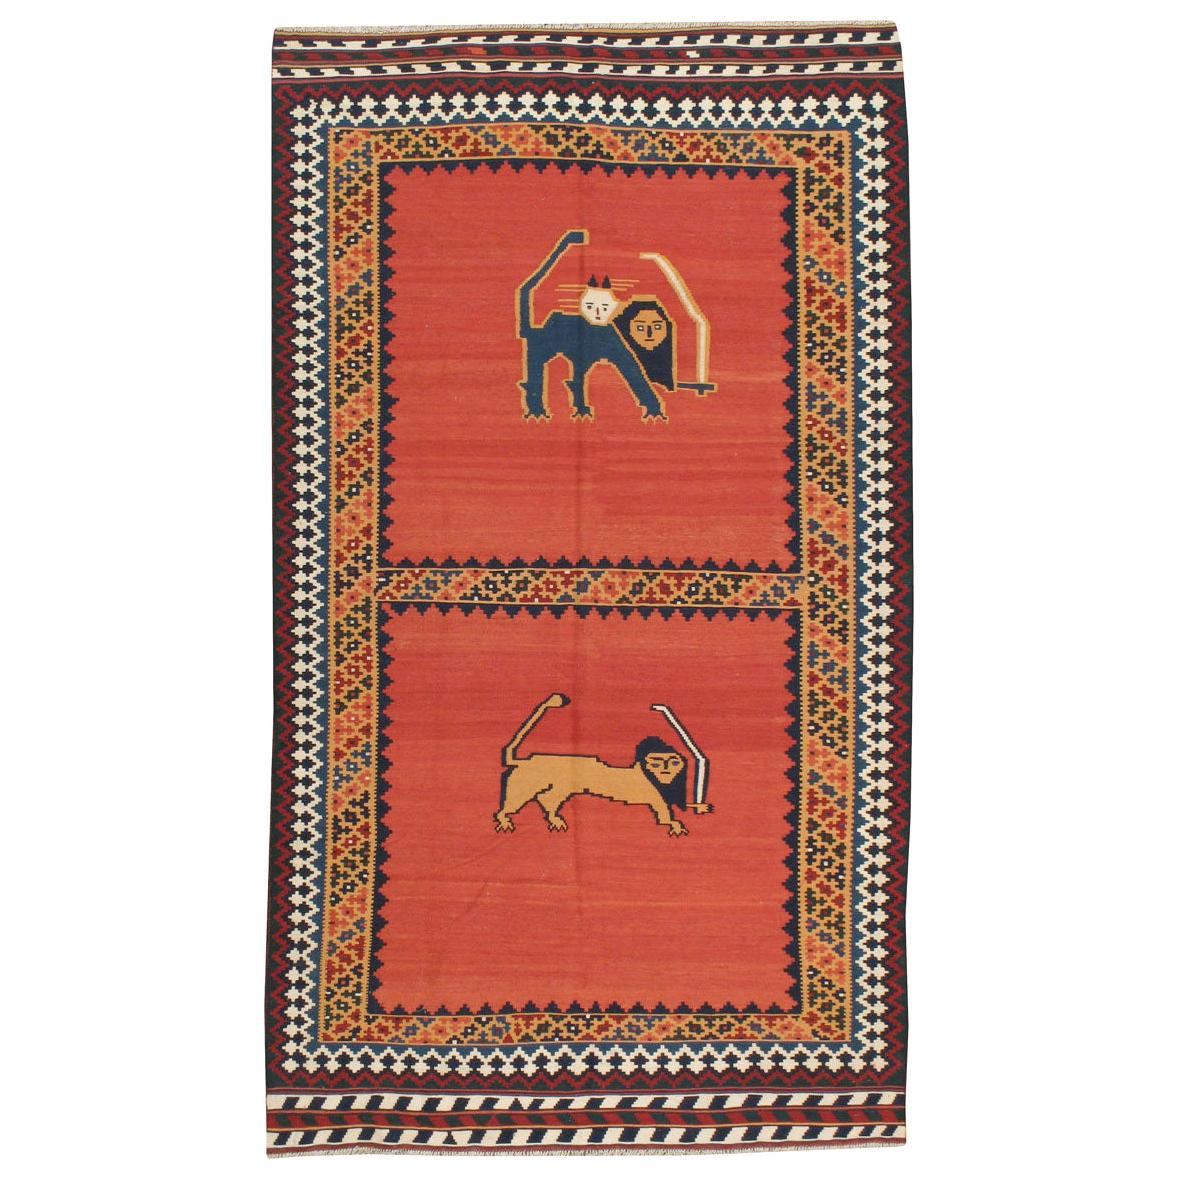 Tribal Mid-20th Century Persian Qashqai Pictorial Flat-Weave Kilim Accent Rug